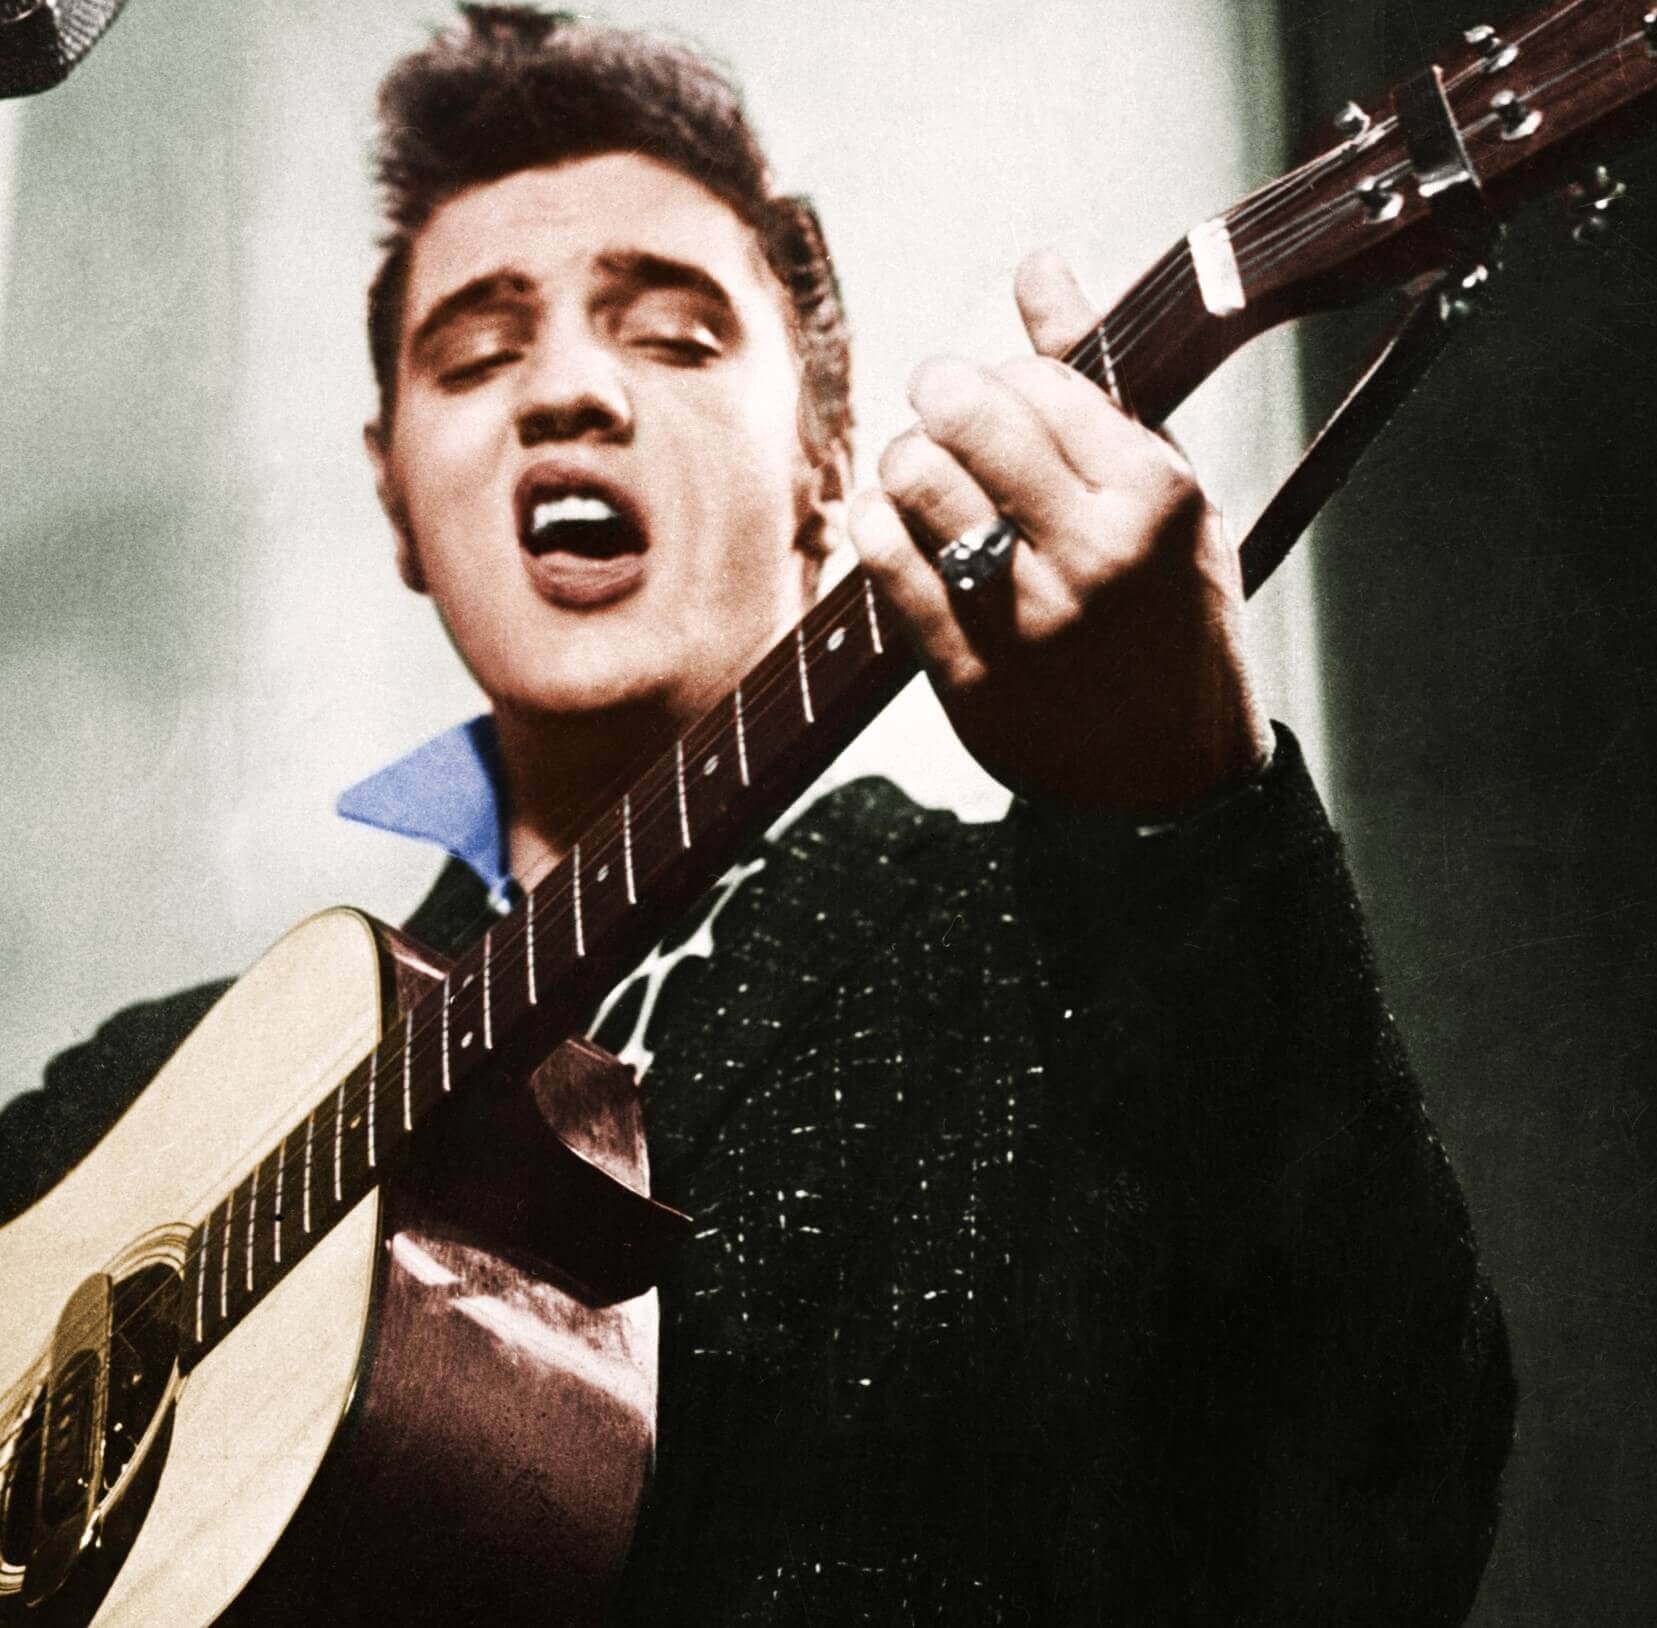 You are currently viewing This Song Connected Elvis Presley to His Gospel Roots